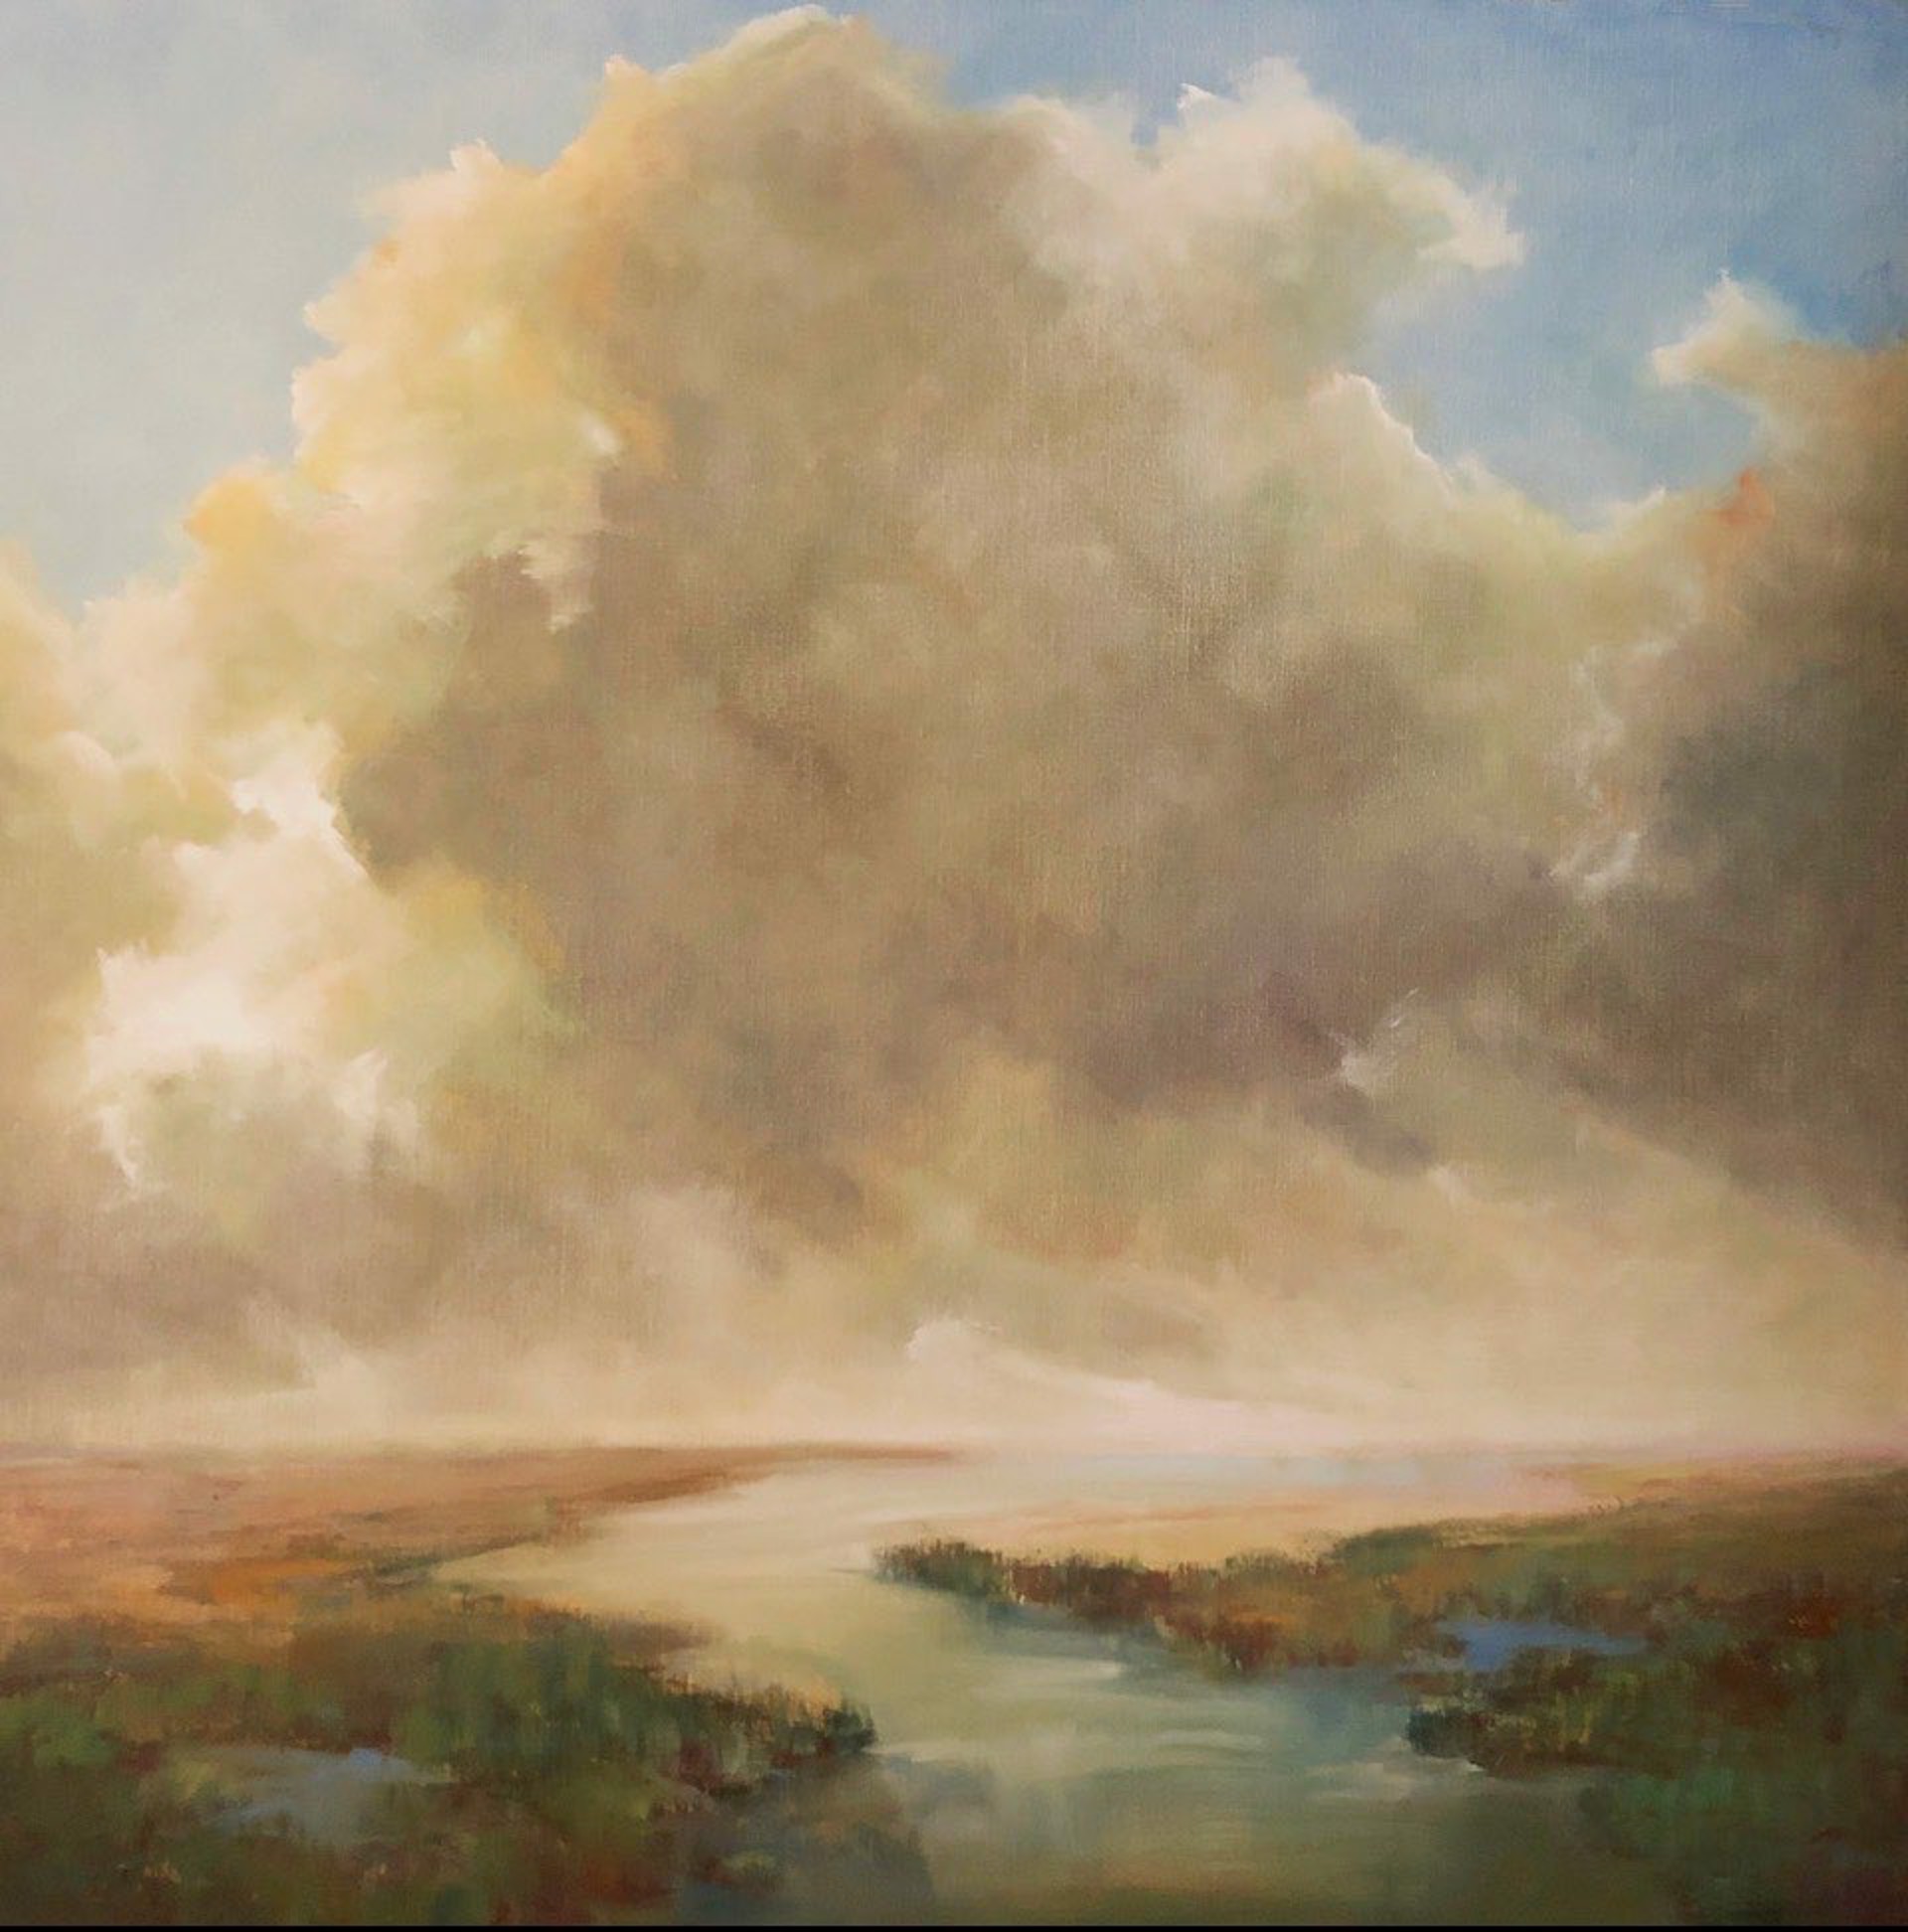 The Clearing of Clouds by Julie Houck